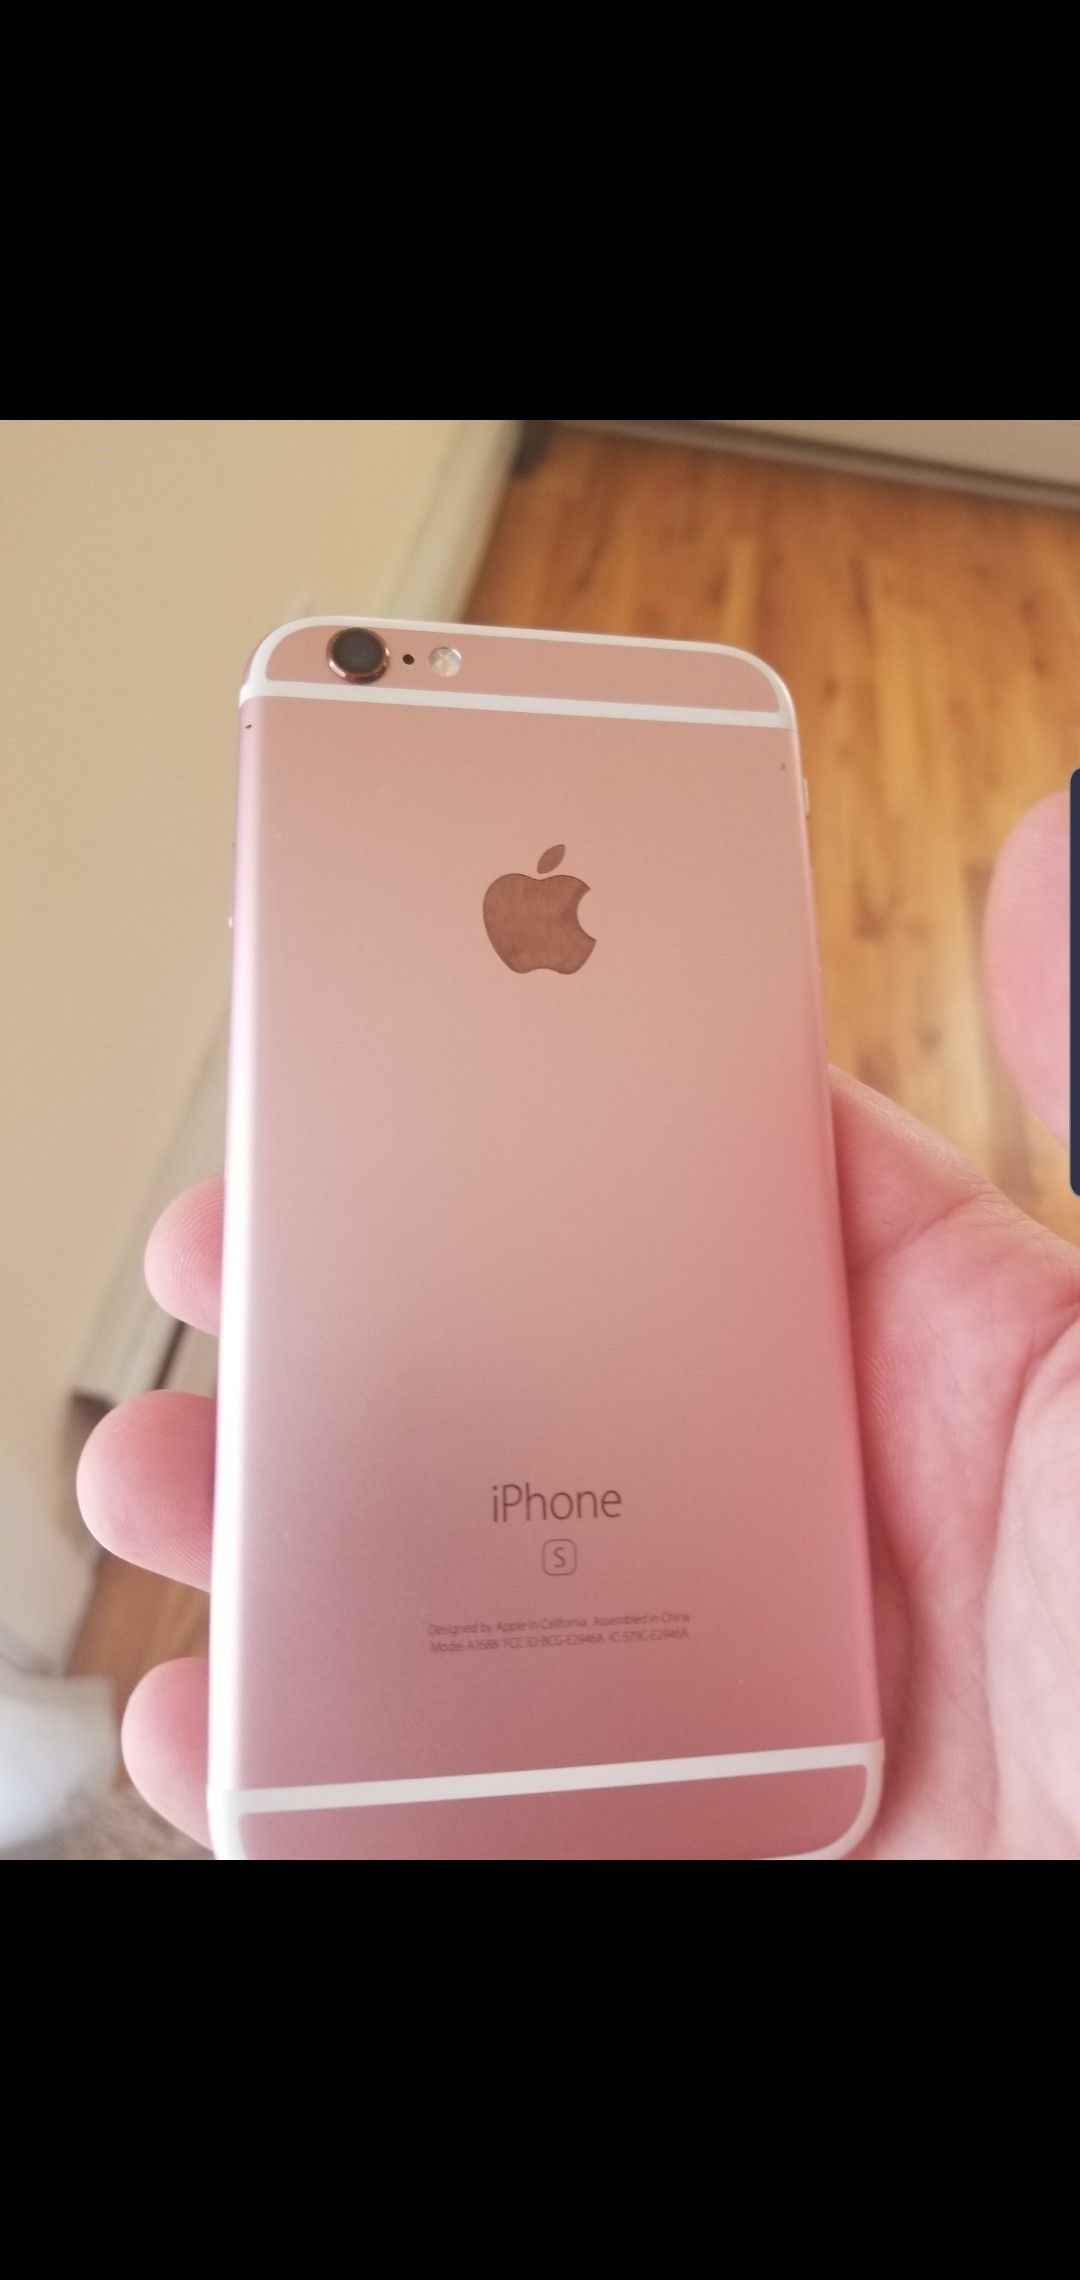 iPhone 6s 64gb rose gold factory unlocked $180 obo